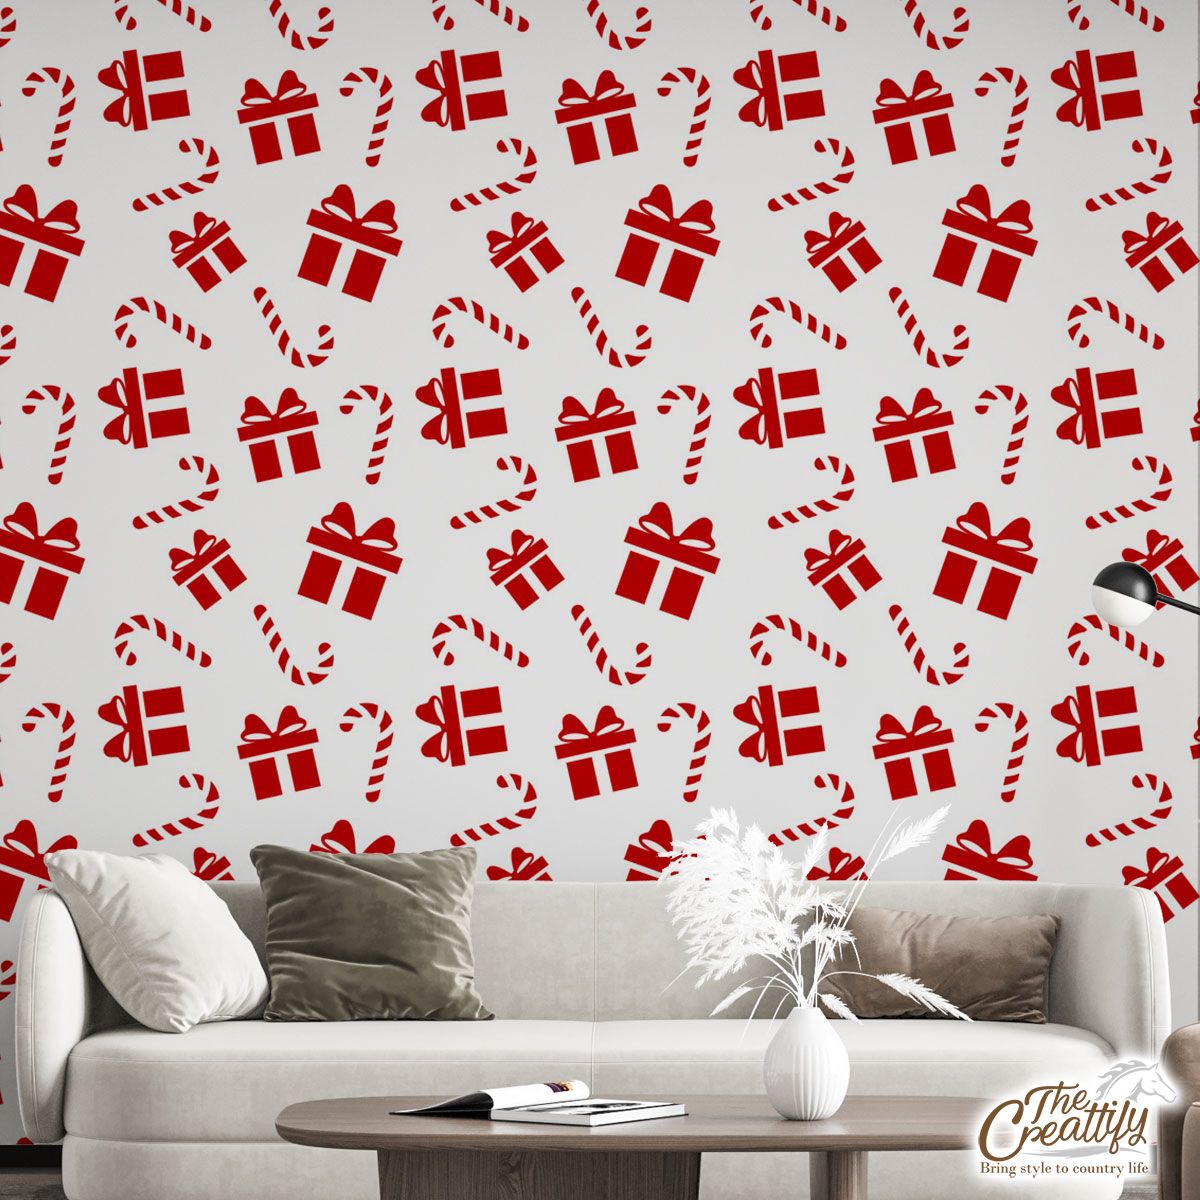 Christmas Gifts And Candy Canes Seamless White Pattern Wall Mural